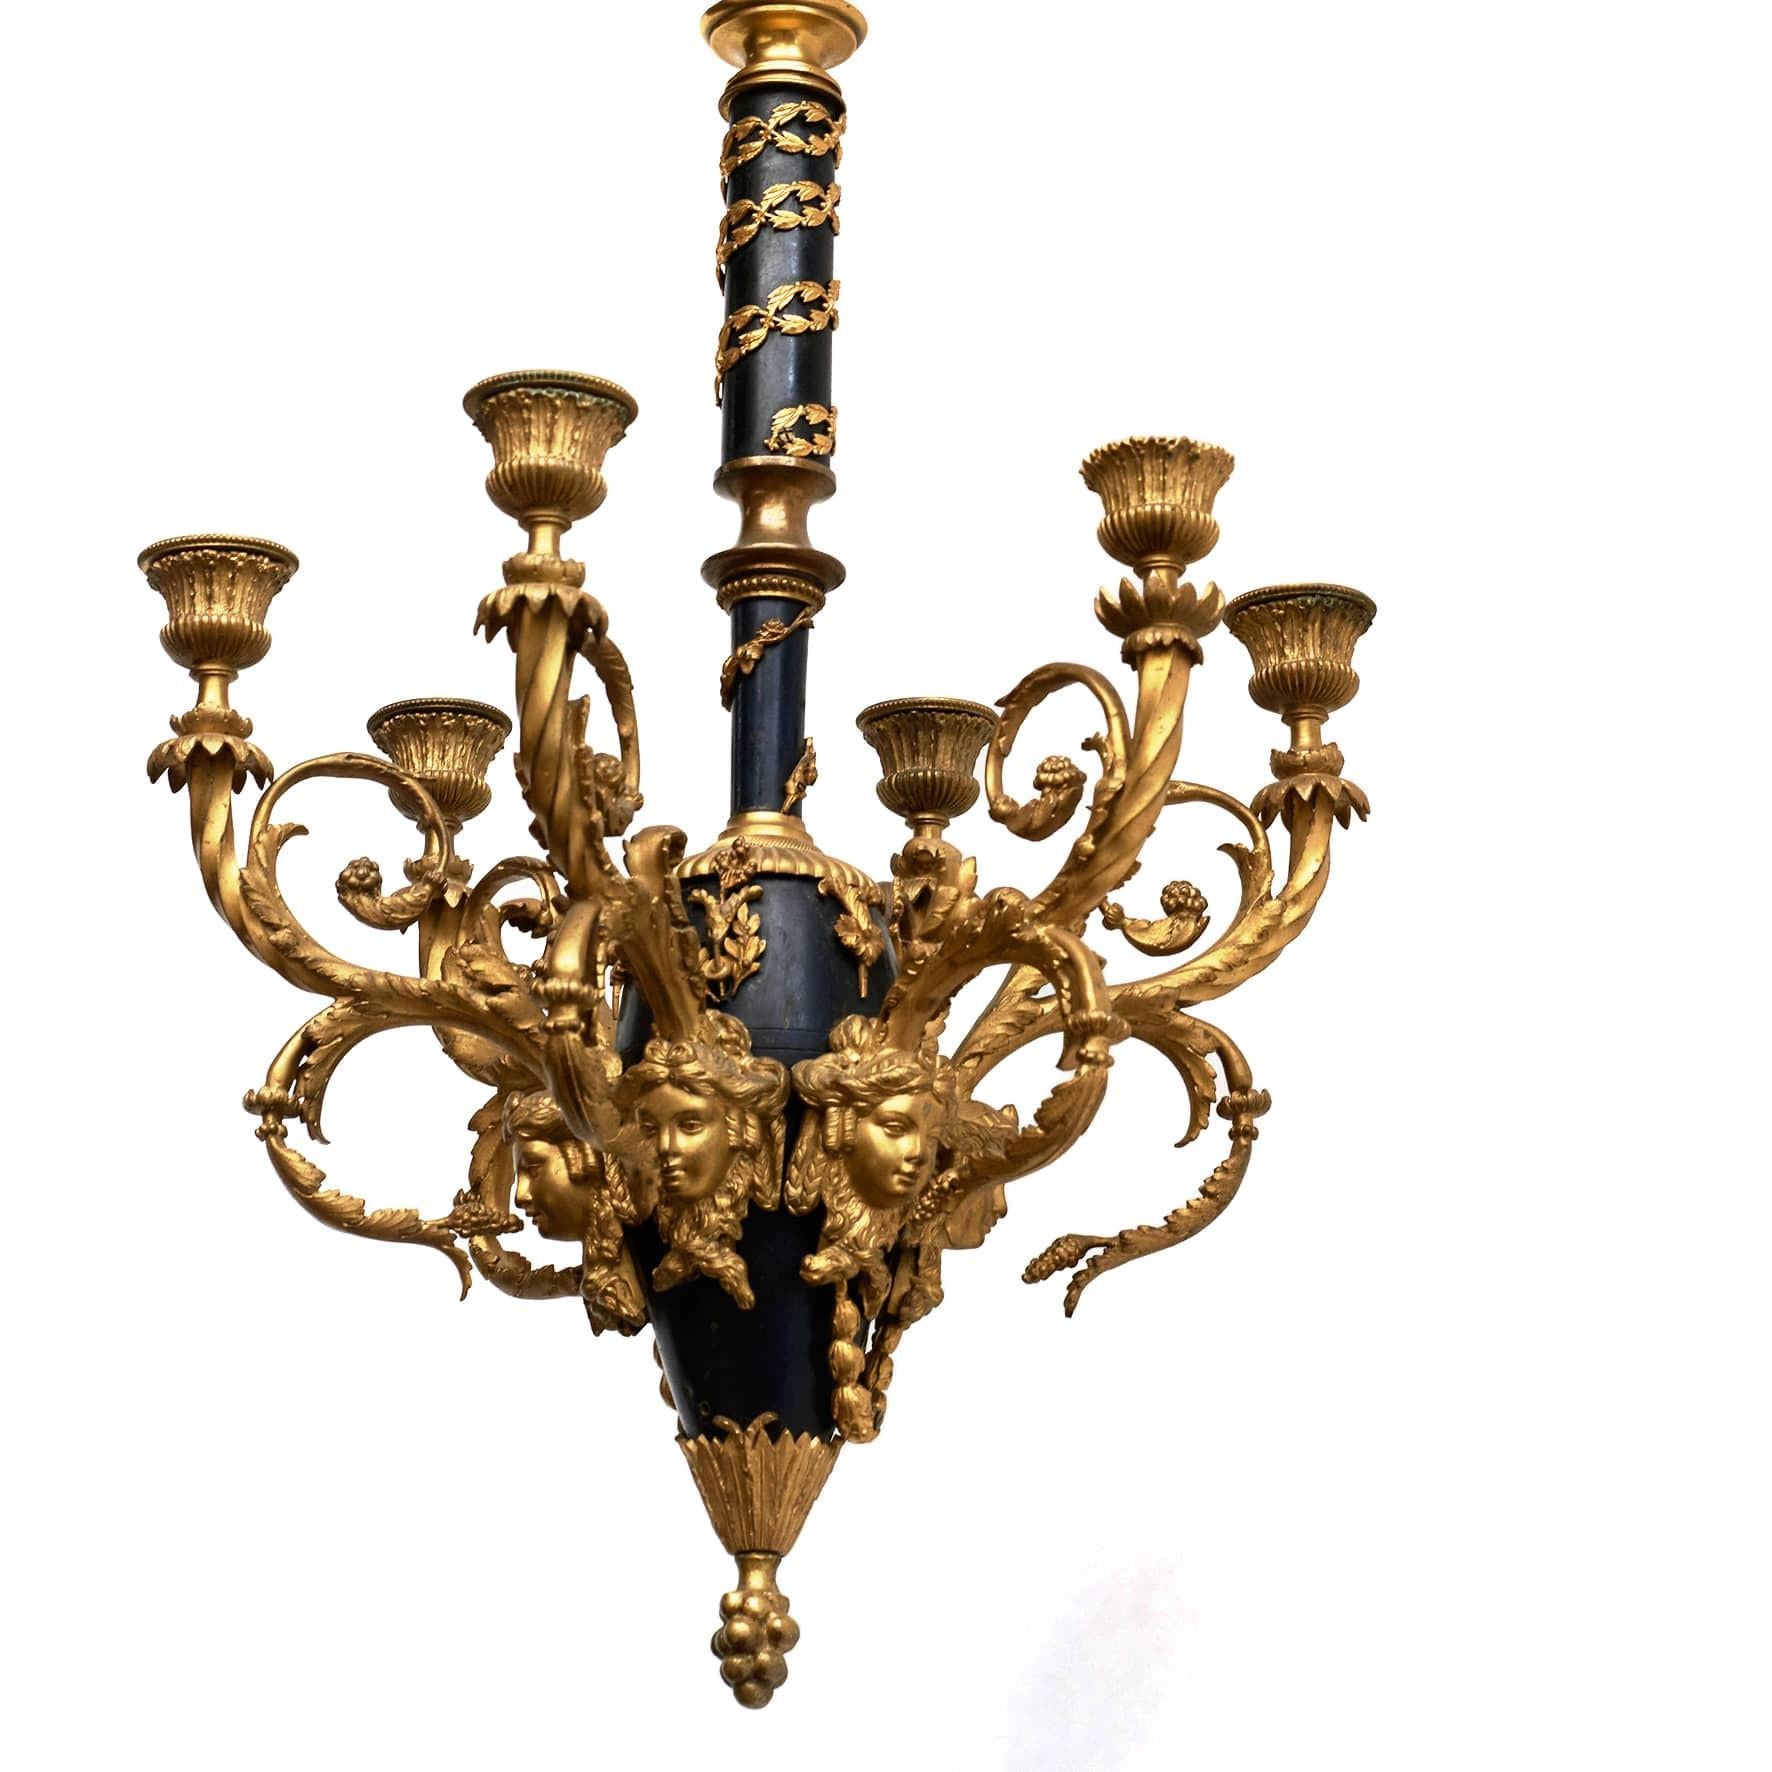 Decorative Napoleon III chandelier with 6 arms.
Gilded in black patinated bronze with fine details, leaf work and gilded female heads under each candle arm and fine chisels on the candle cuffs.

The chandelier is finished with a gilded cone and